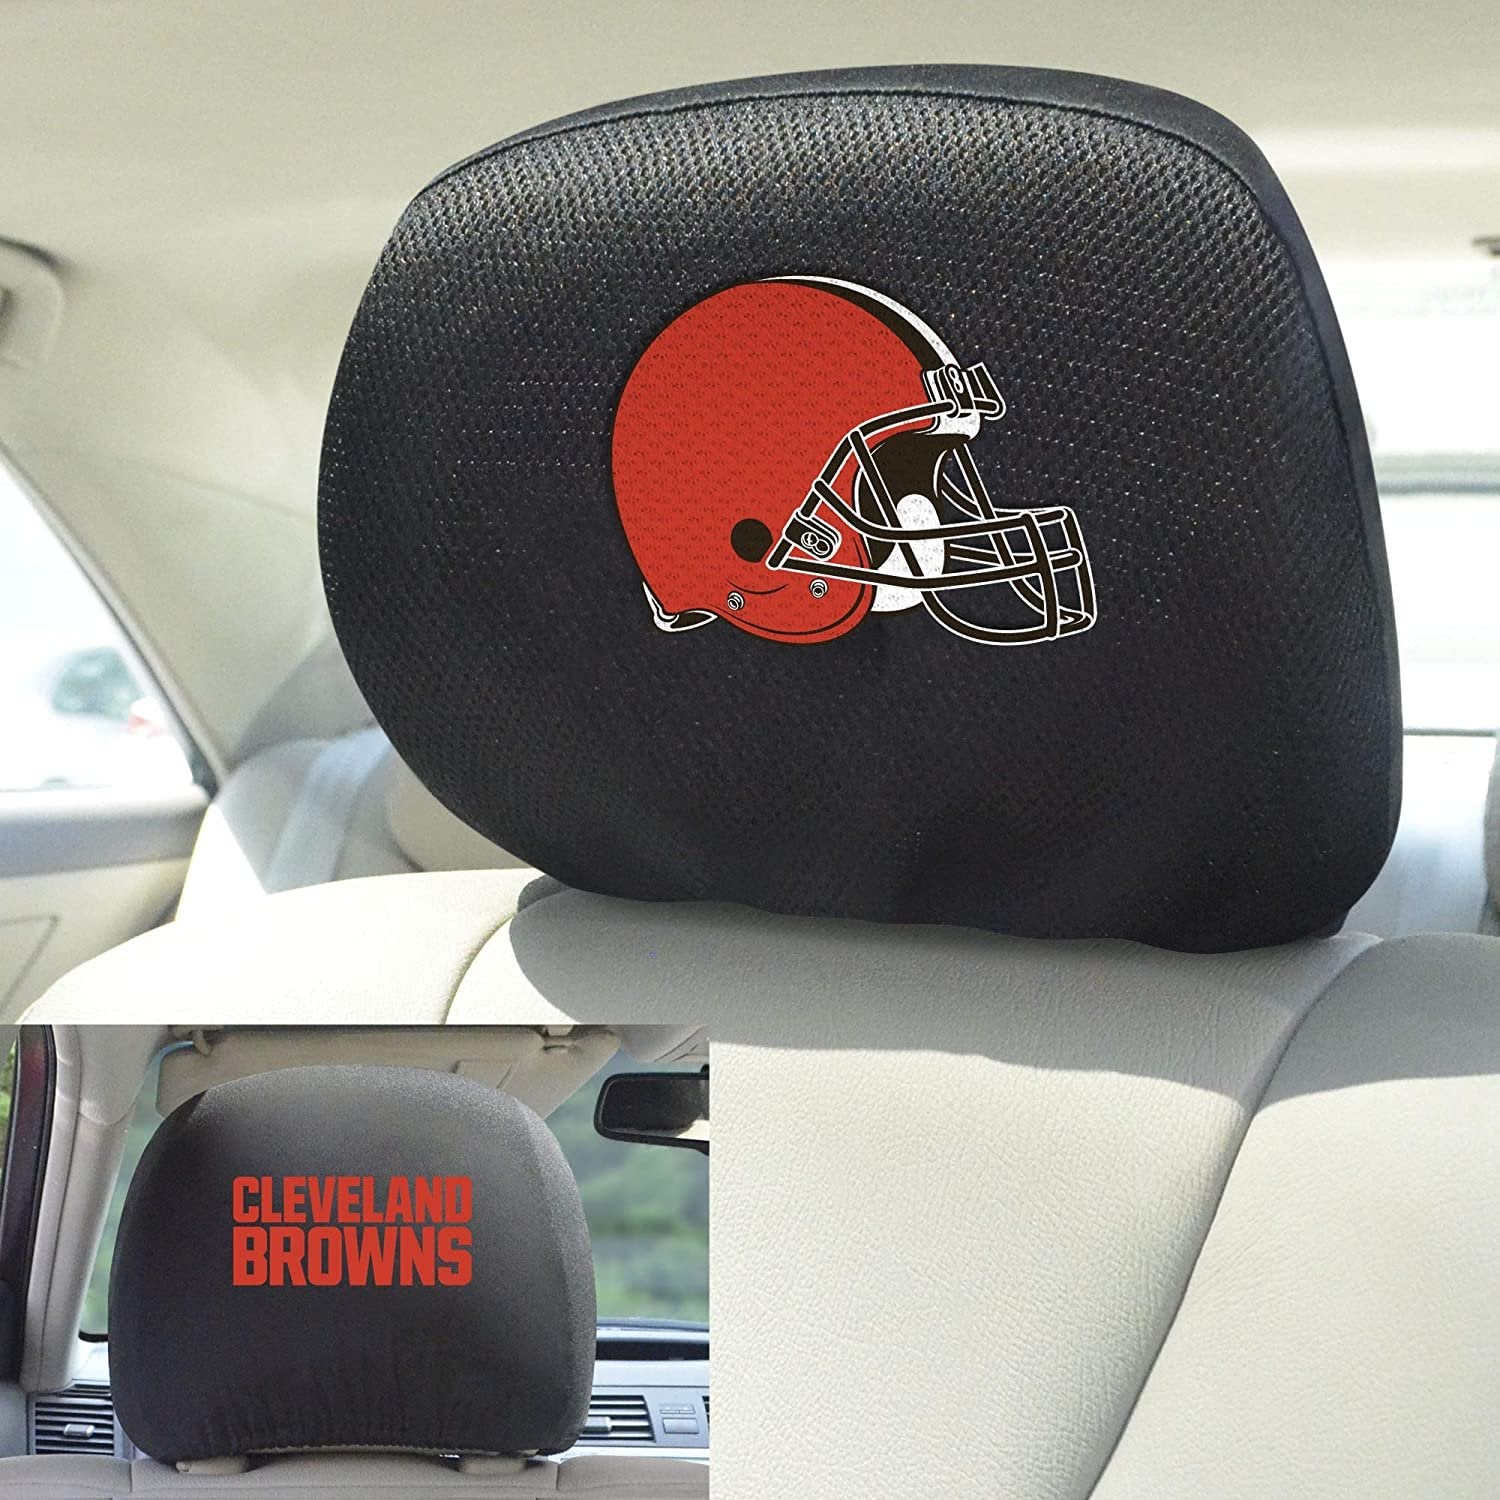 Cleveland Browns Pair of Premium Auto Head Rest Covers, Embroidered, Black Elastic, 14x10 Inch